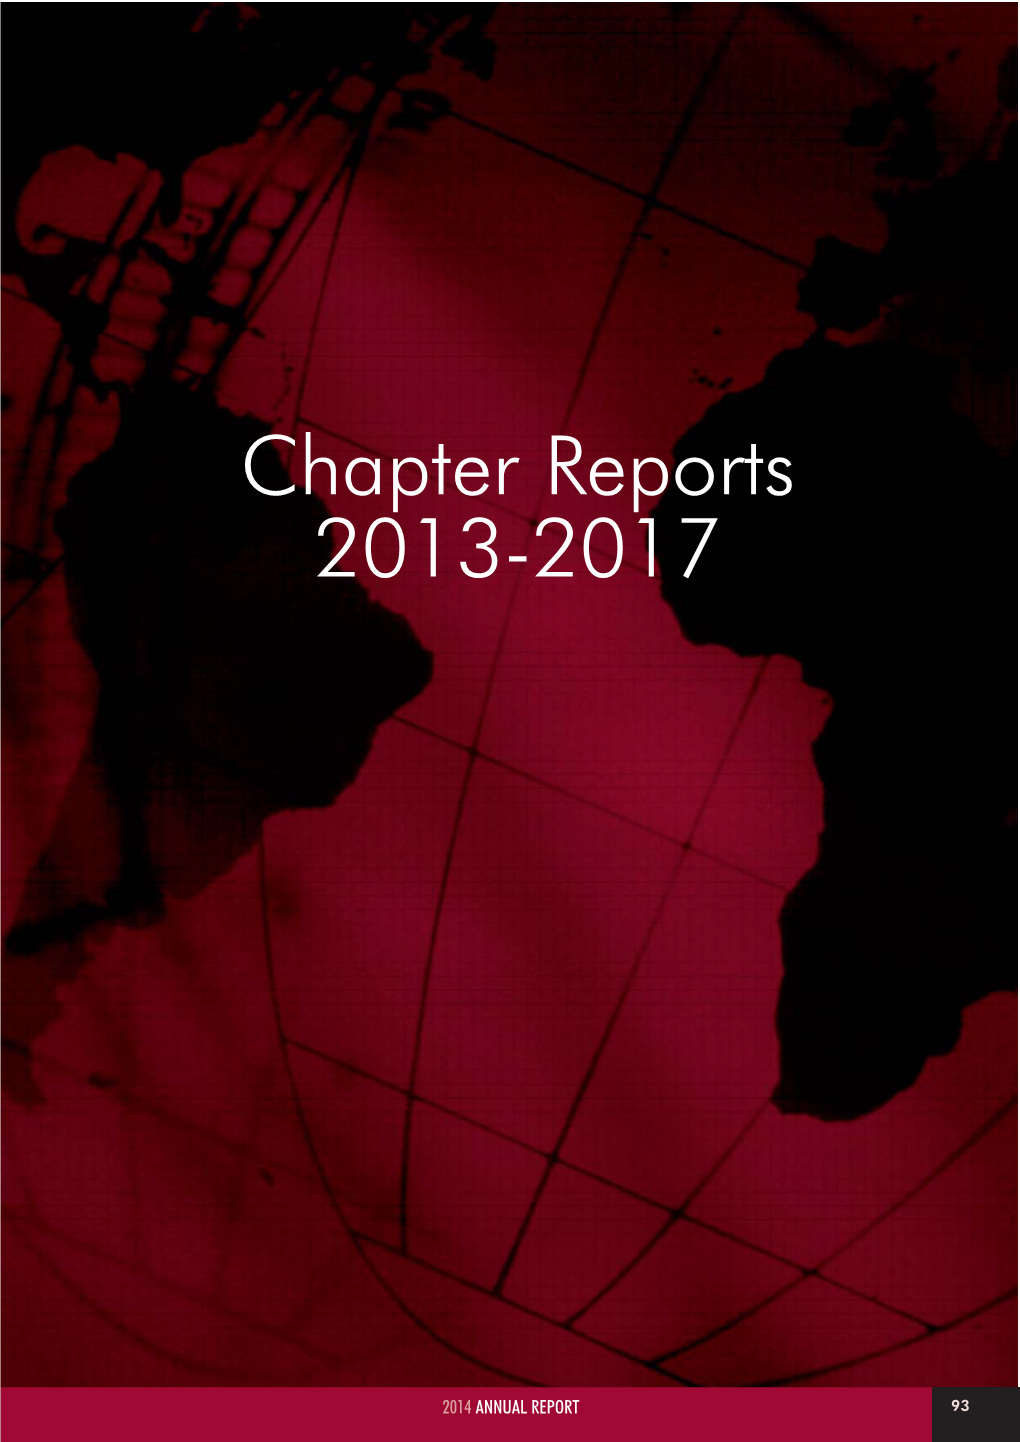 Chapter Reports 2013-2017